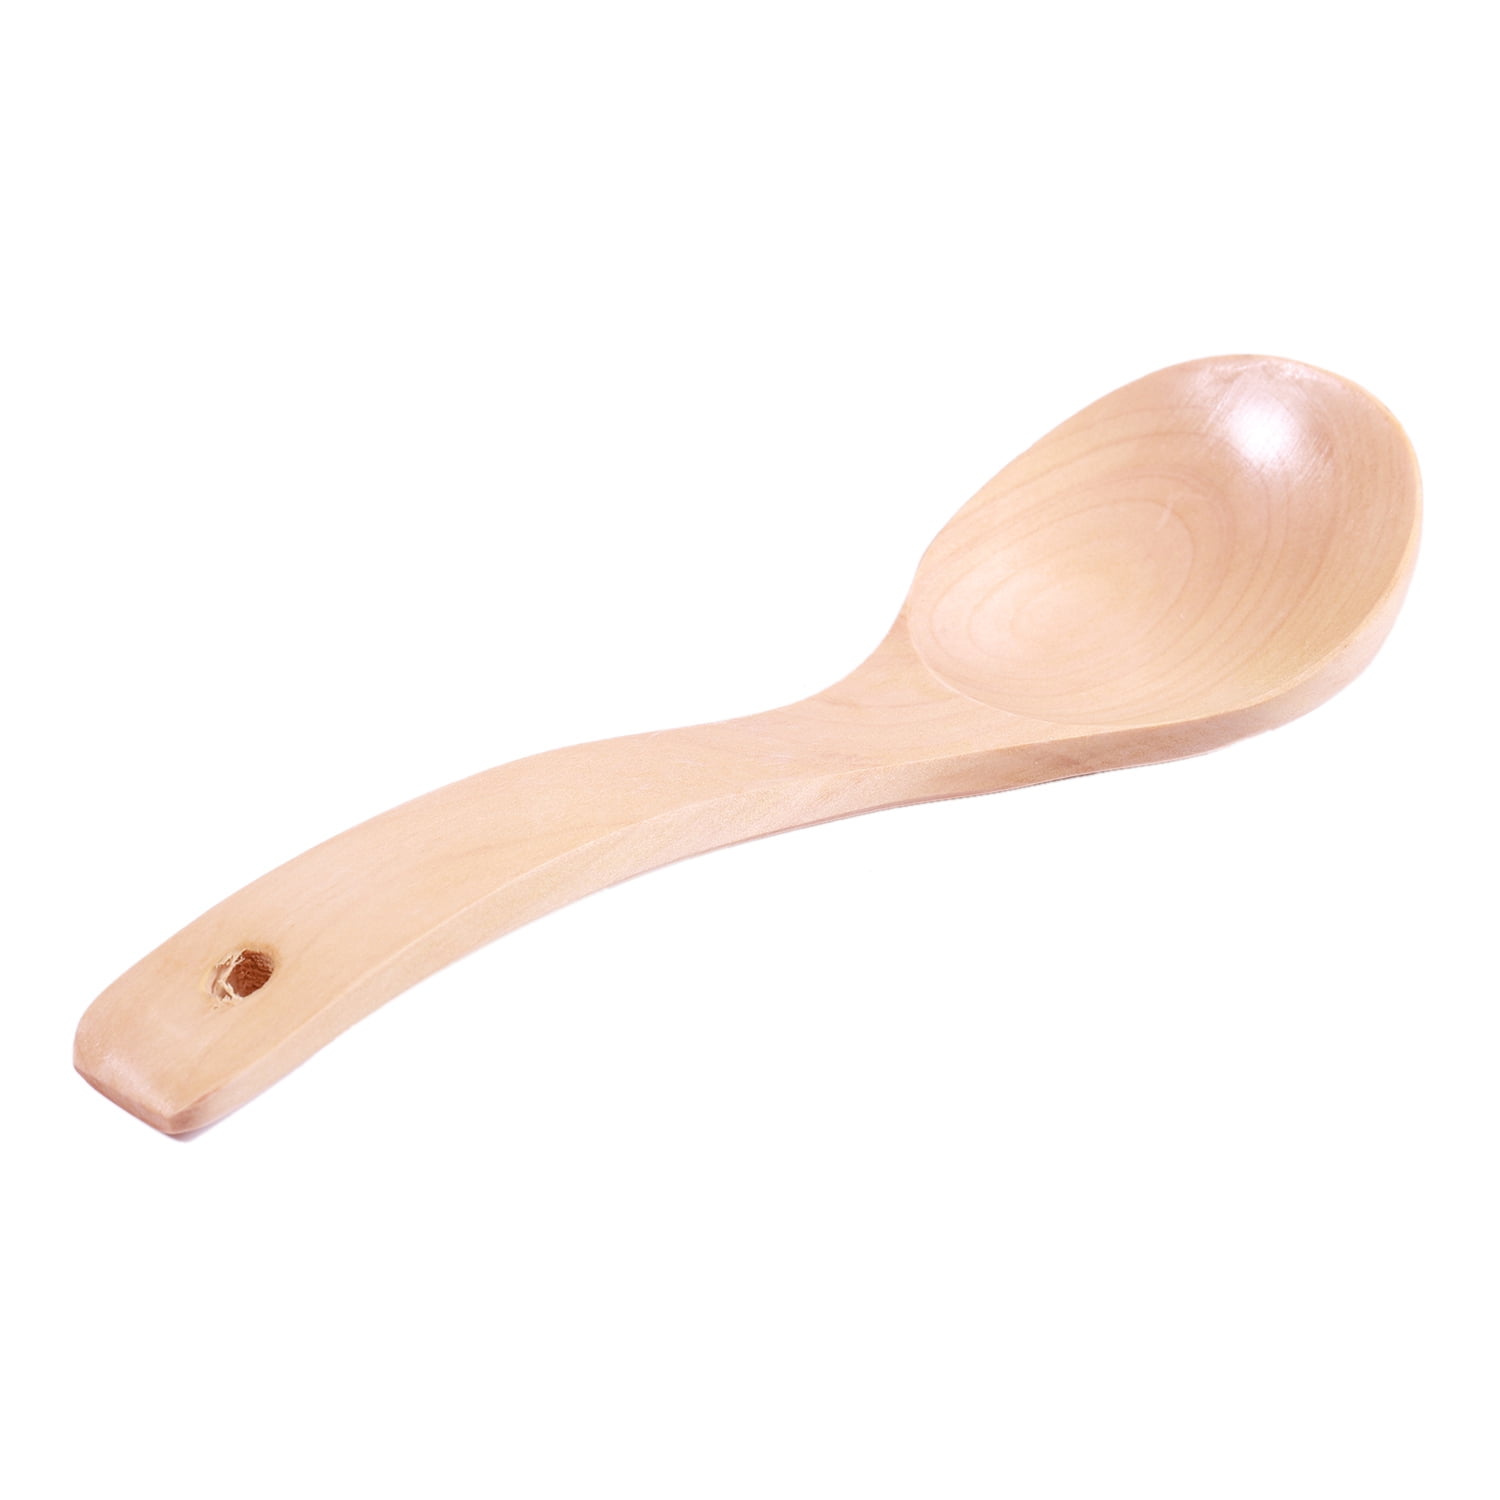 Sourcingmap Household Kitchen Wood Round Head Rice Scoop Soup Ladle Spoon 9 Long 